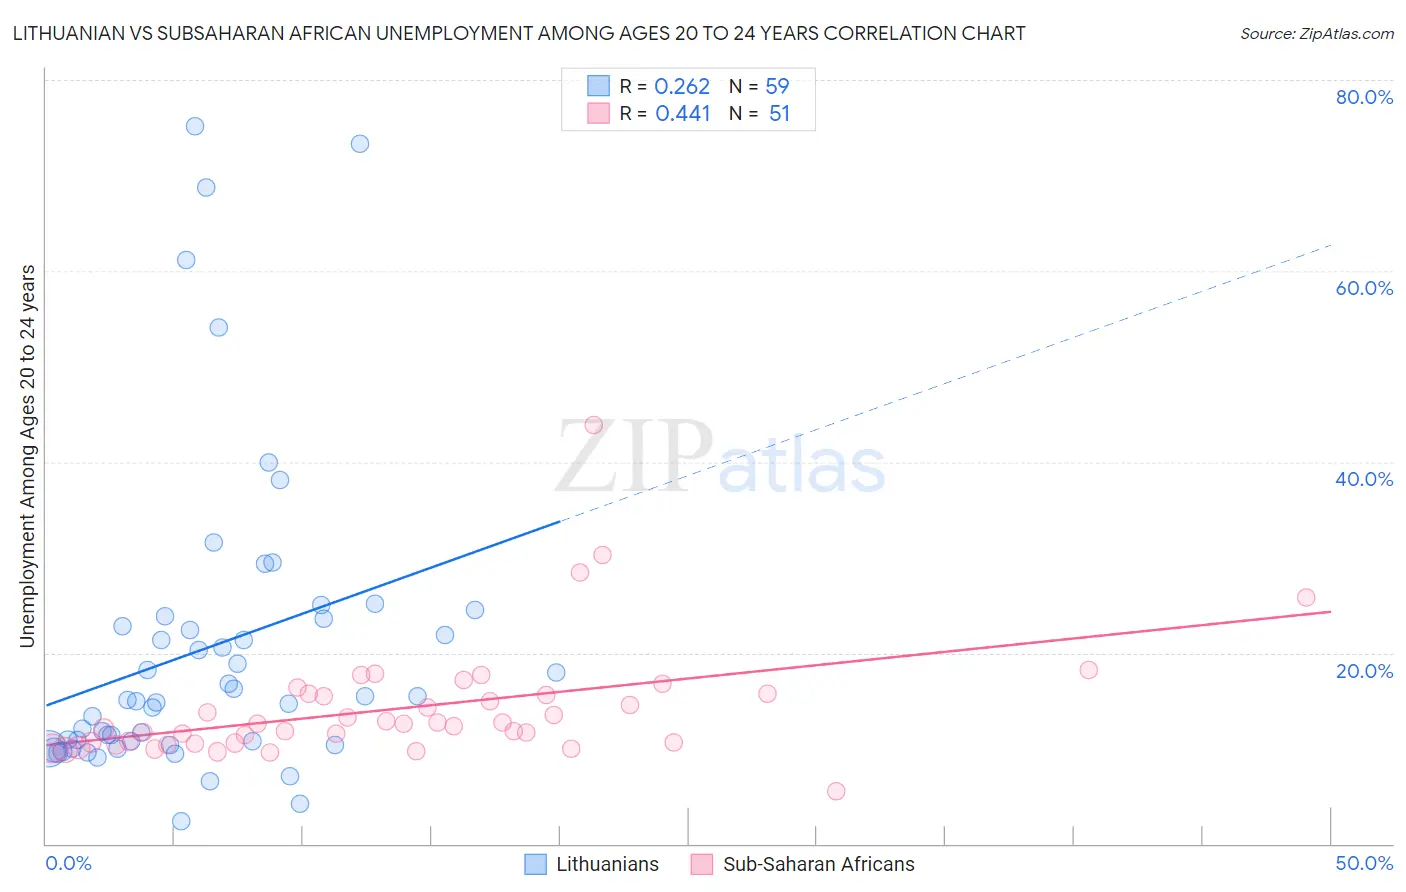 Lithuanian vs Subsaharan African Unemployment Among Ages 20 to 24 years